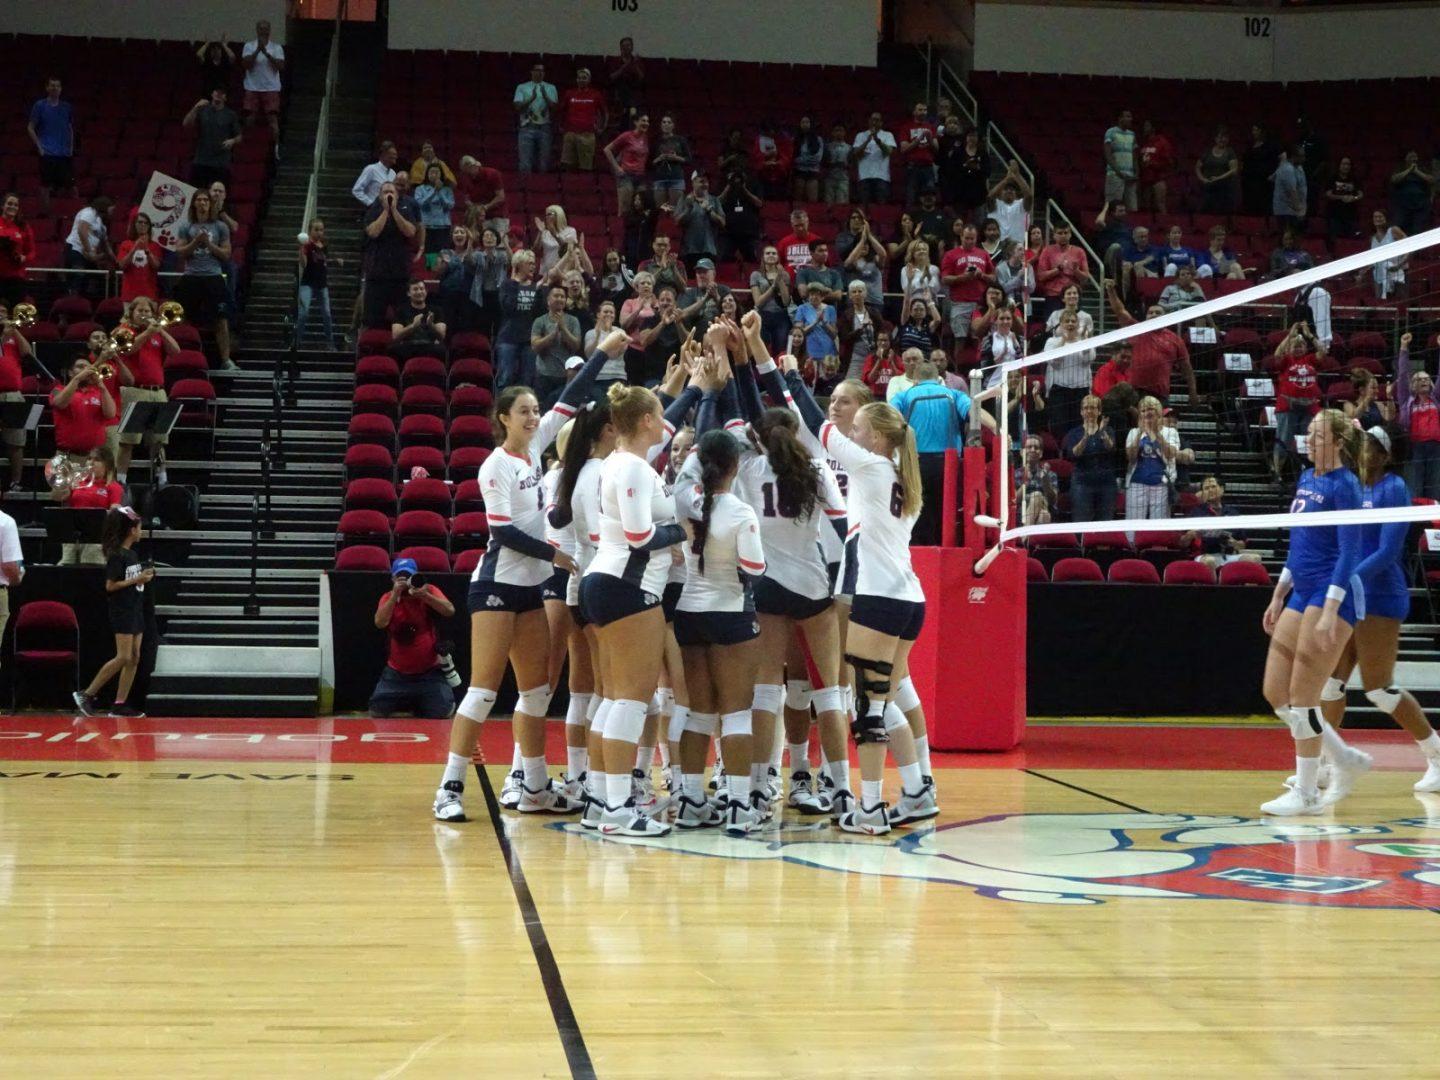 The+Fresno+State+volleyball+team+celebrates+a+3-2+sets+win+against+American+University+in+the+Fresno+State+Invitational+at+the+SaveMart+Center.+Jorge+Rodriguez%2C+Aug.+31%2C+2018.%0A